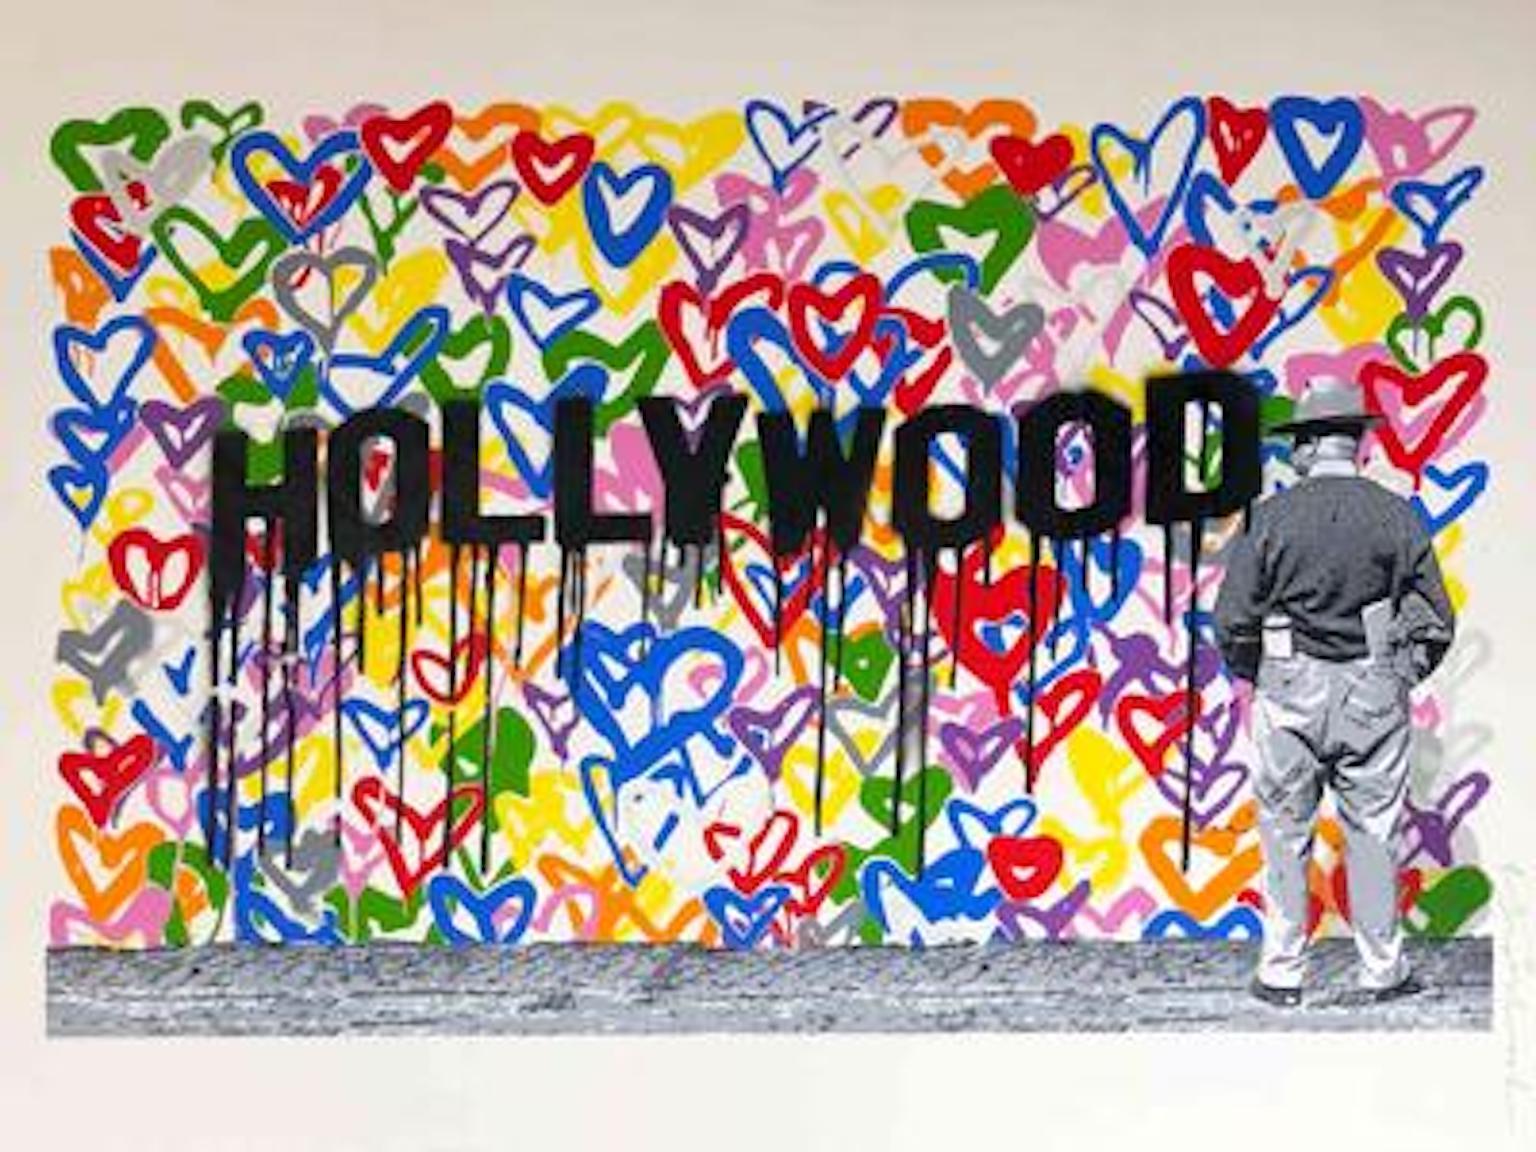 "Hollywood" Hollywood; 2016; Silkscreen and stencil on paper; 22 1/2 x 30  - Print by Mr. Brainwash